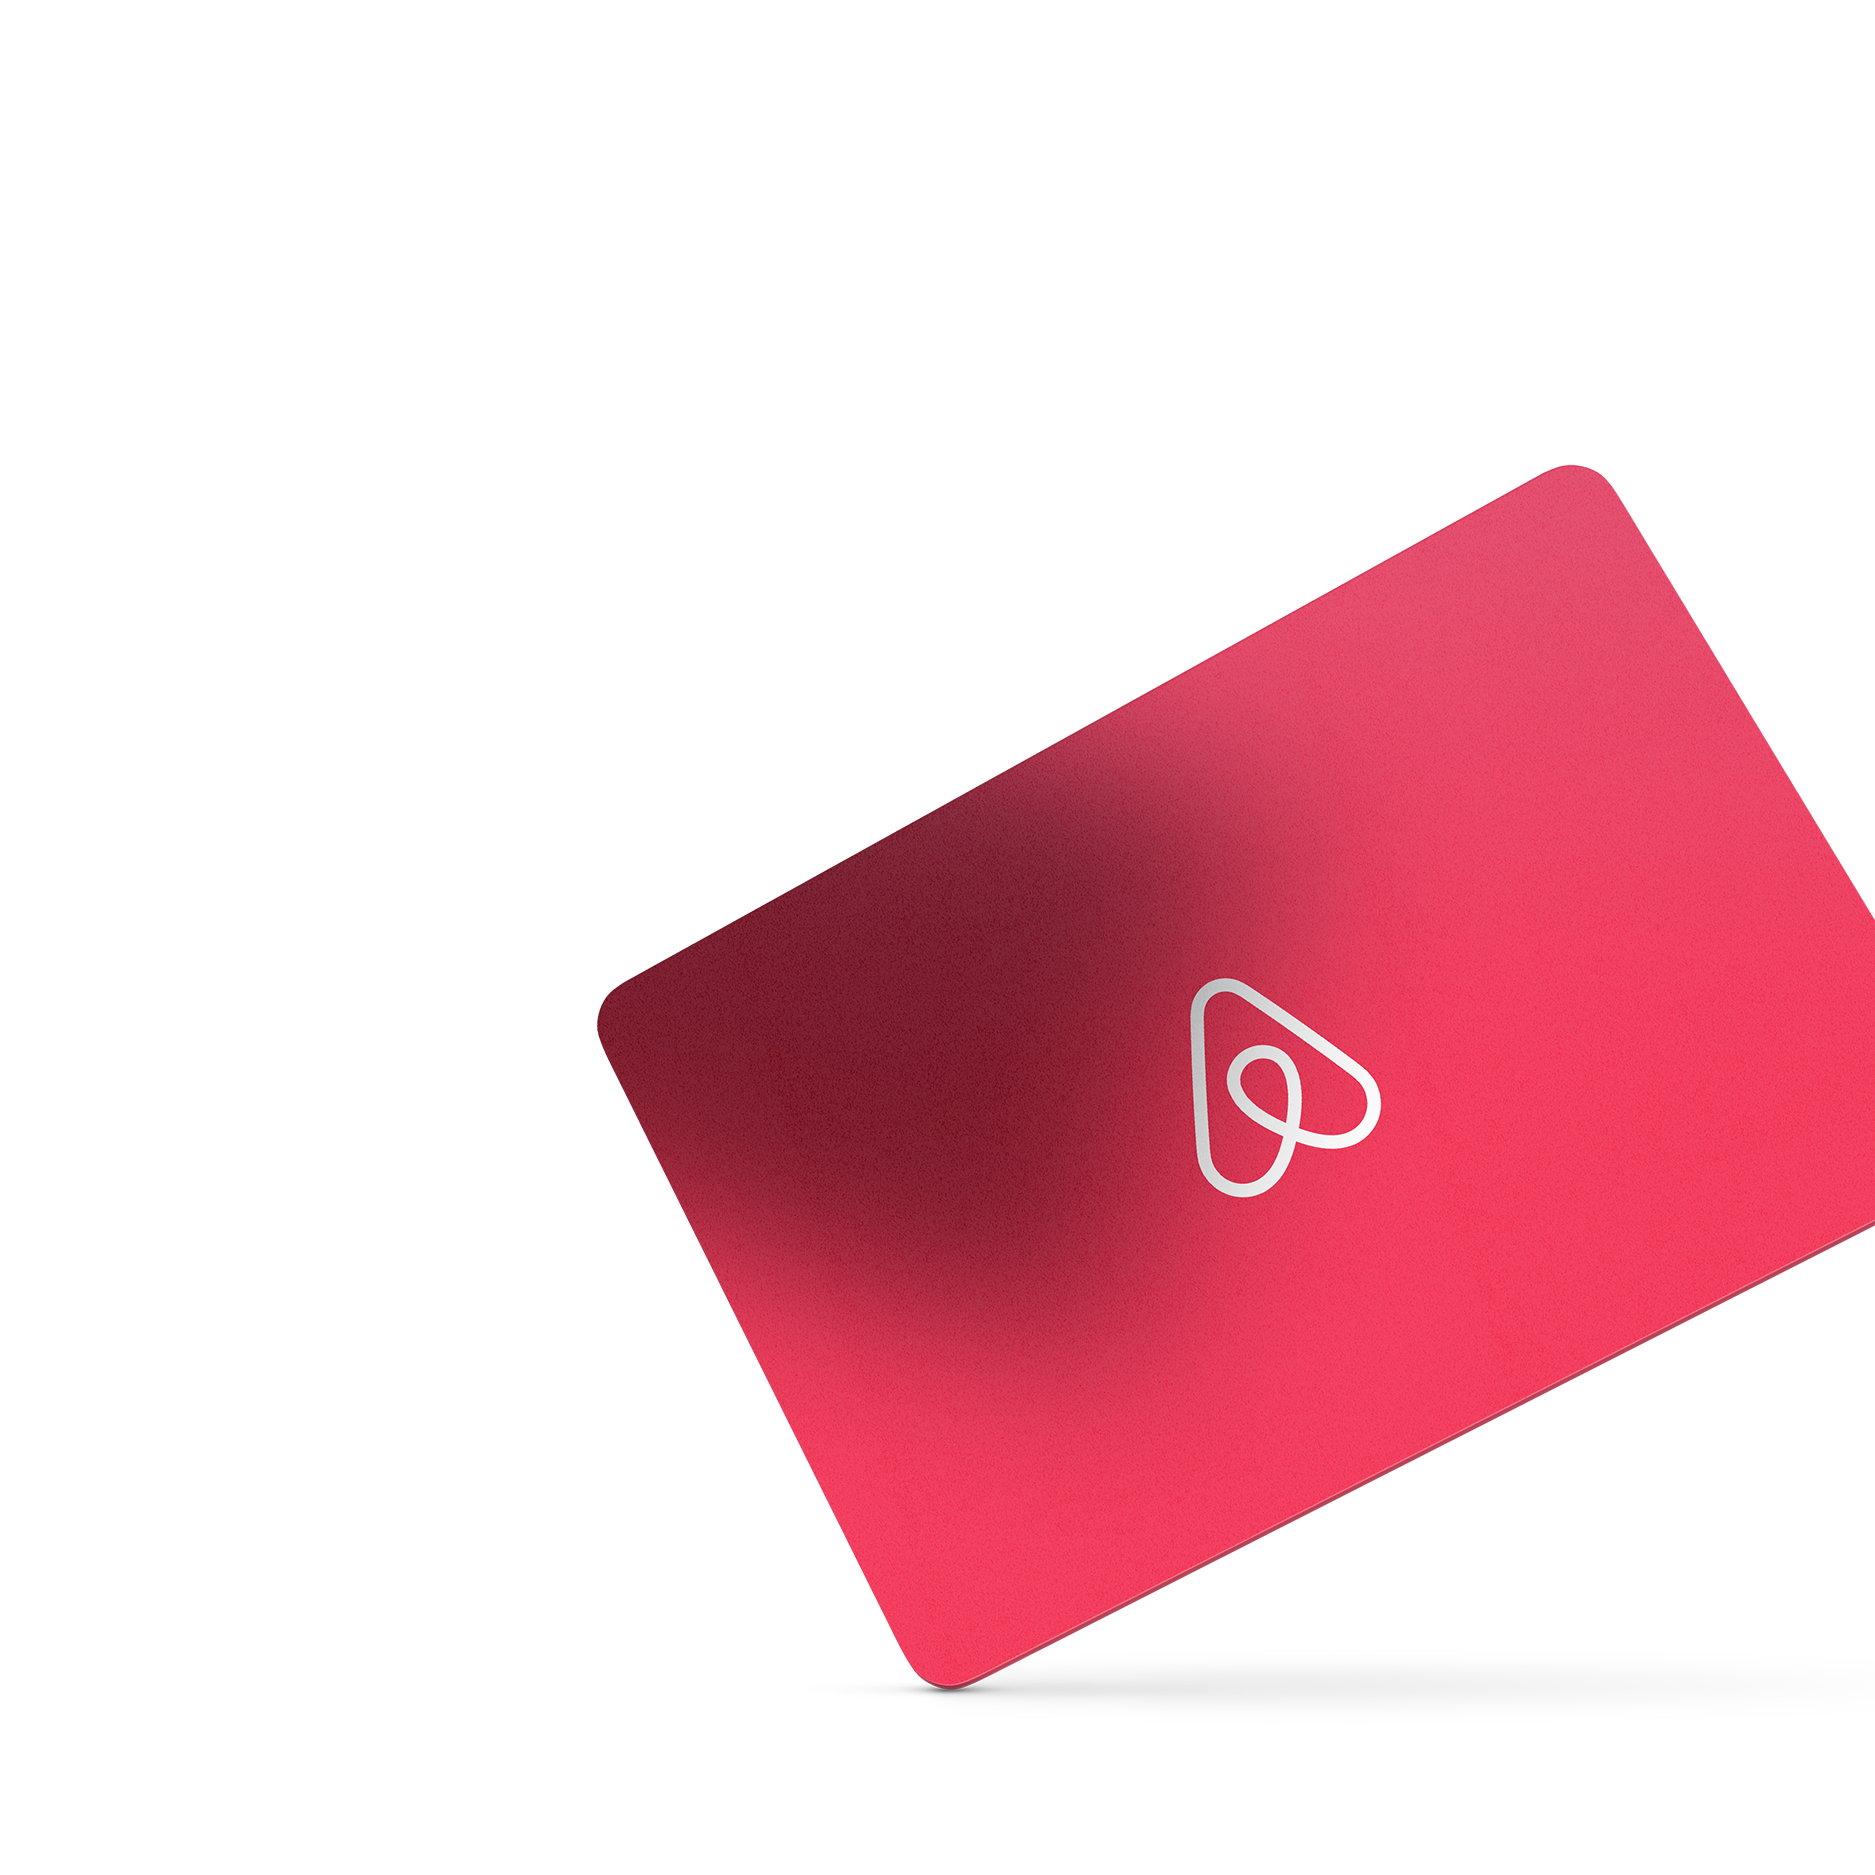 Buy an Airbnb gift card | Airbnb®